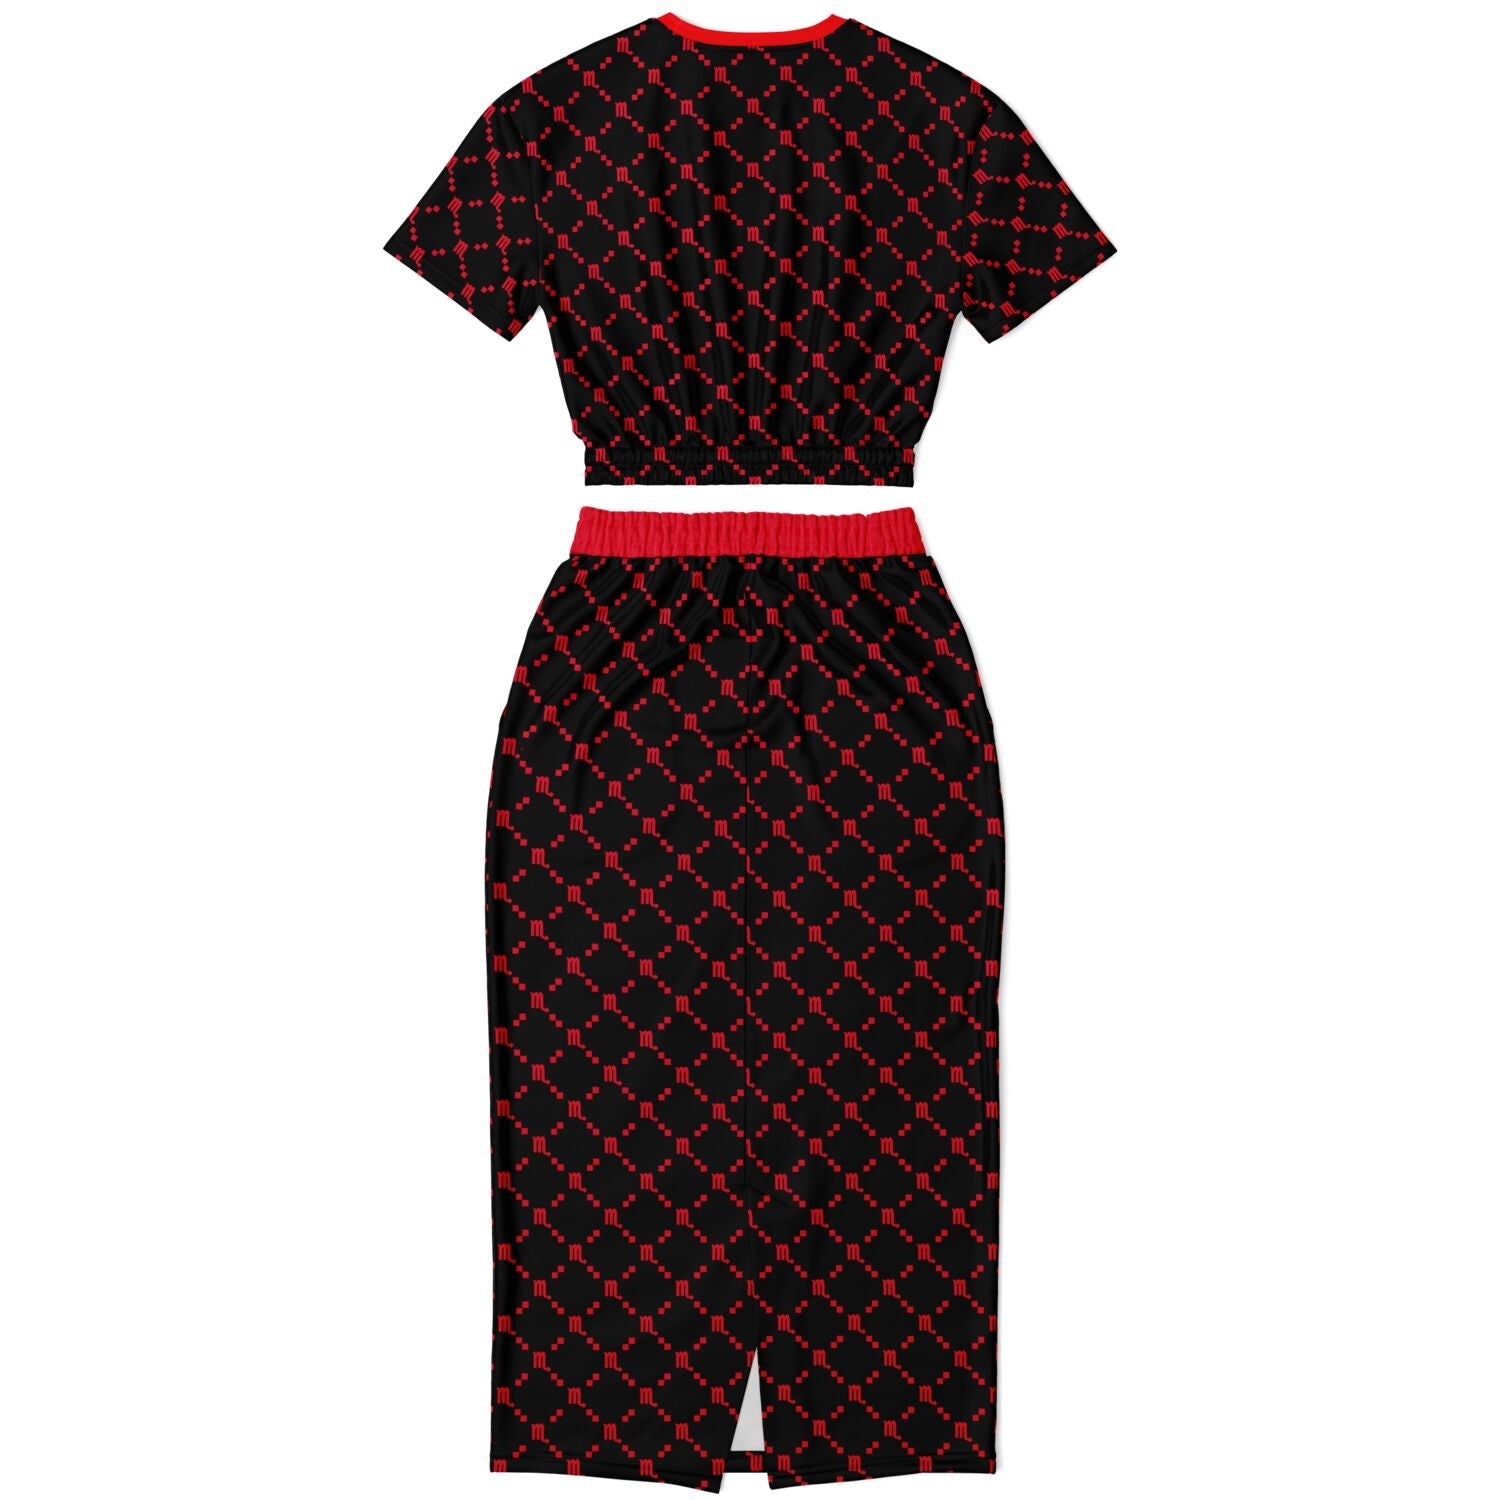 Scorpio G-Style Red Crop Shirt & Skirt Outfit